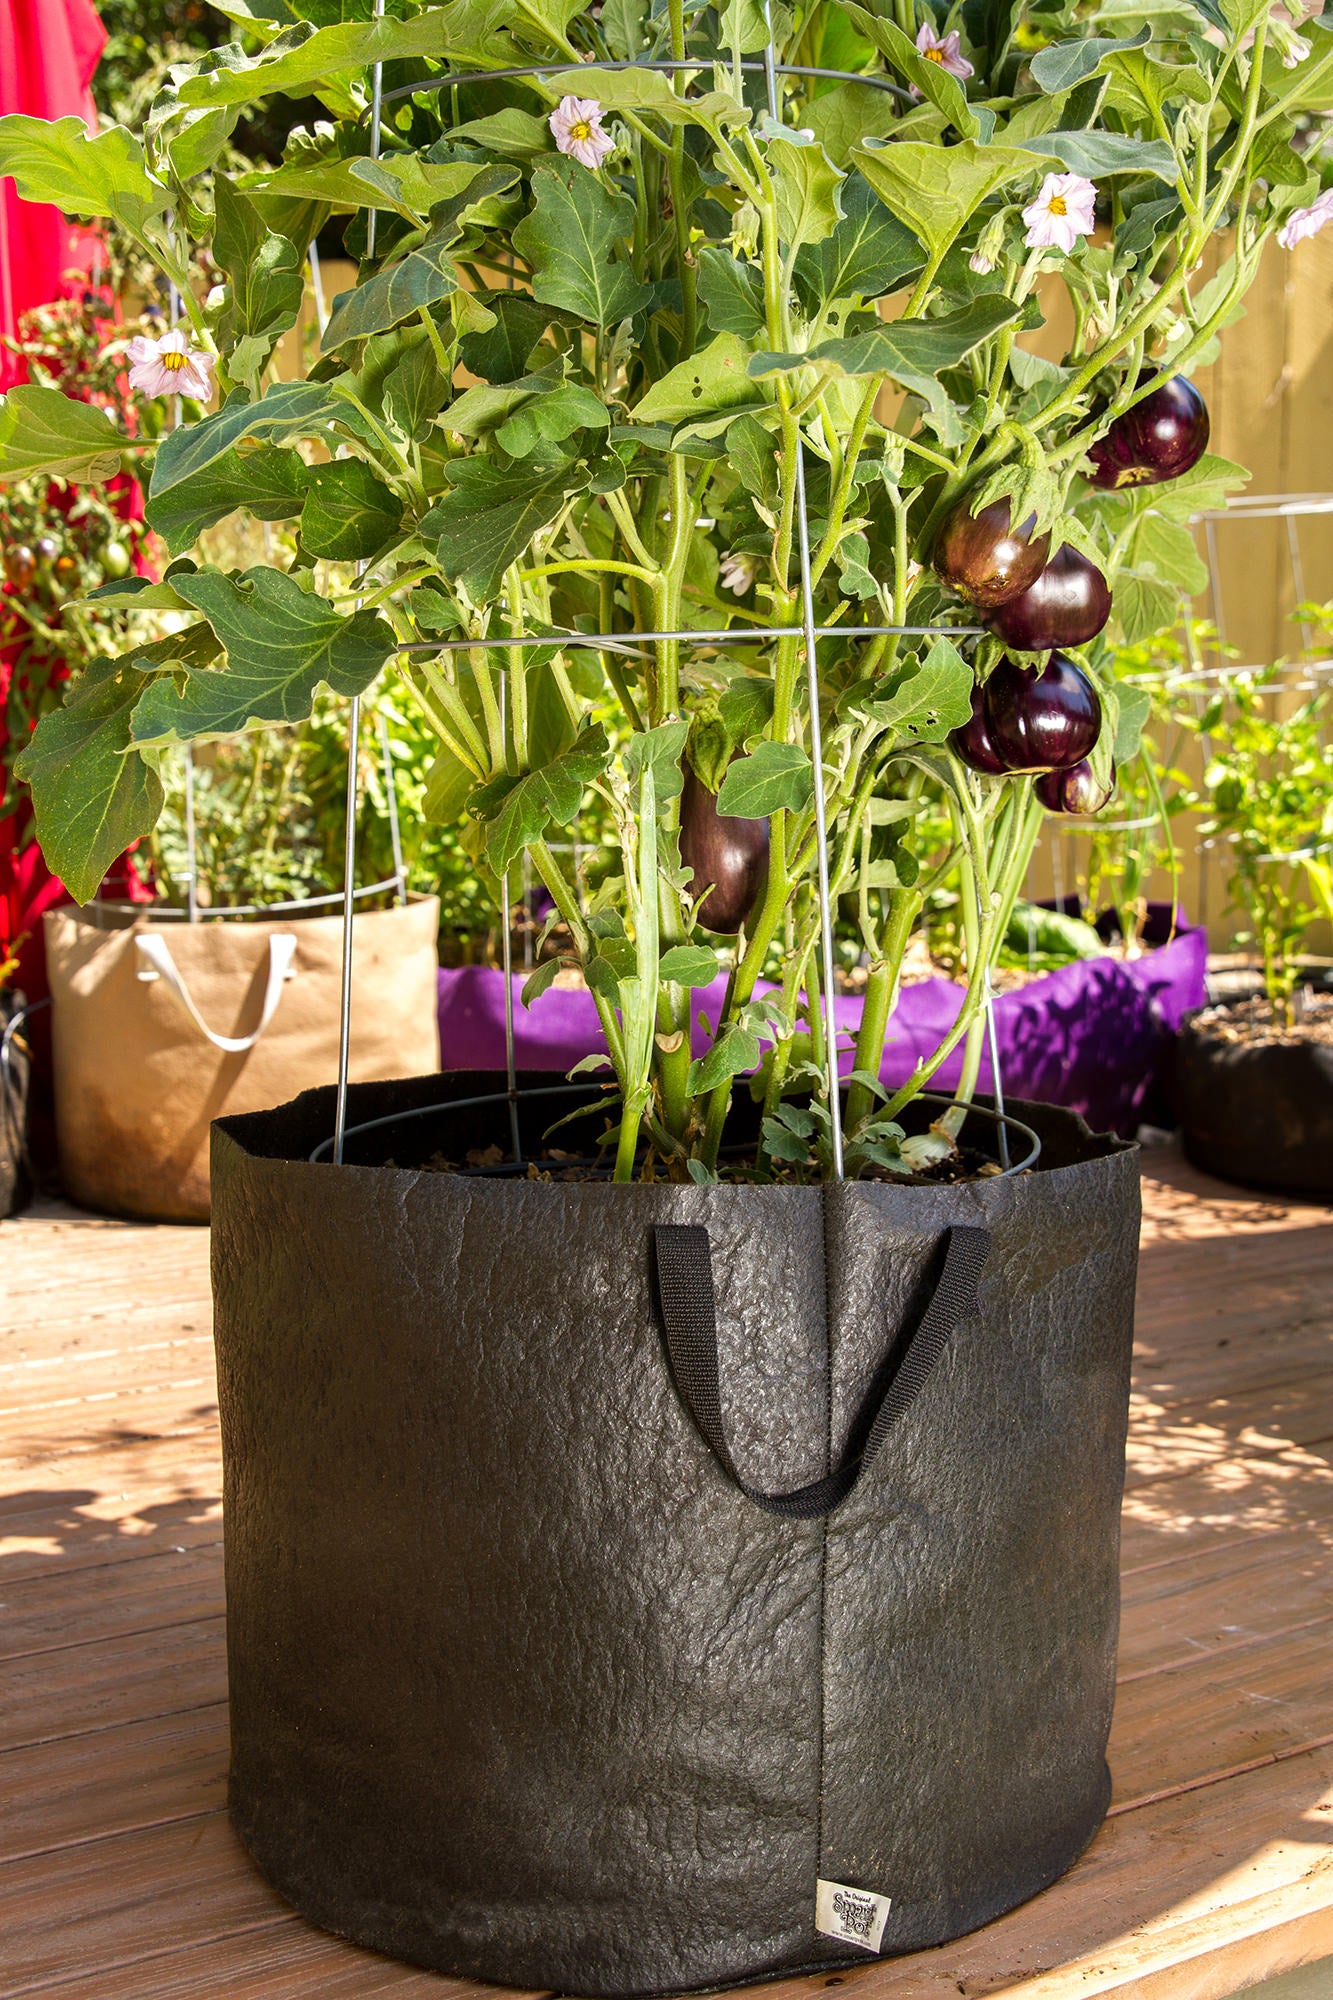 Grow Bags, Strawberry Planter Bags With Handles, 5/7/10 Gallon